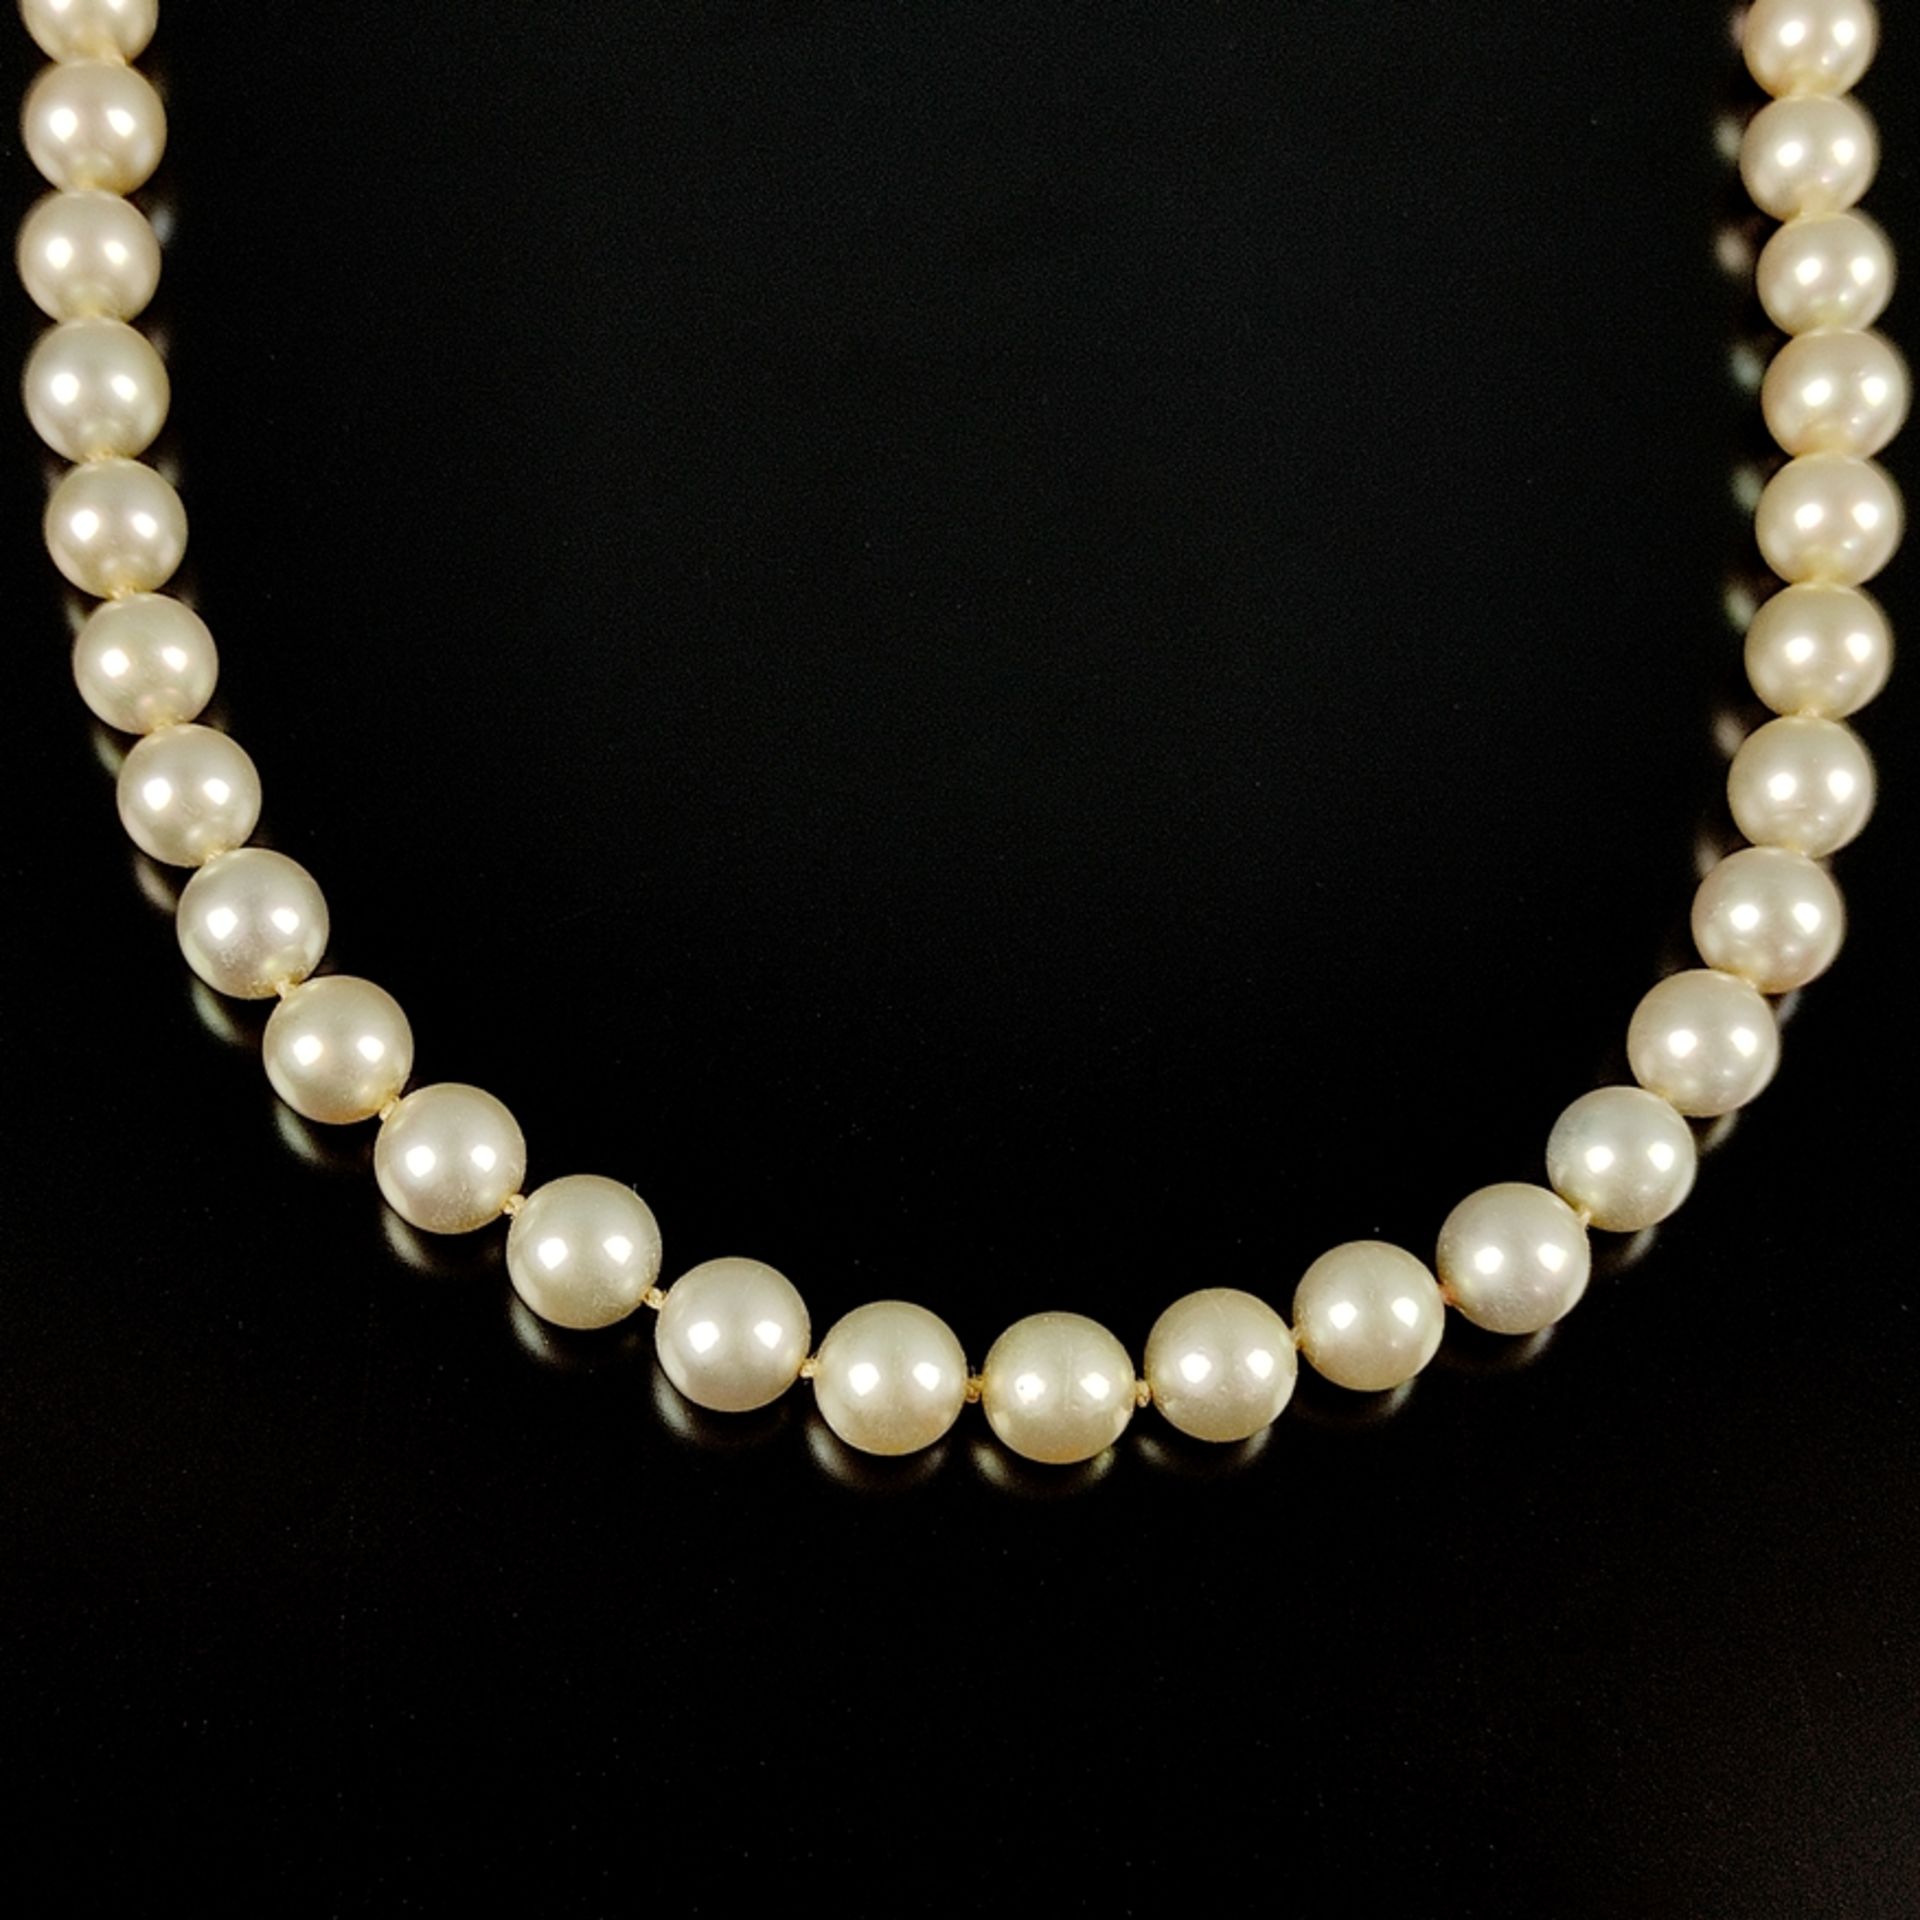 Fine pearl necklace, 585/14K white gold, total weight 28,9g, fine cultured pearls in light grey lus